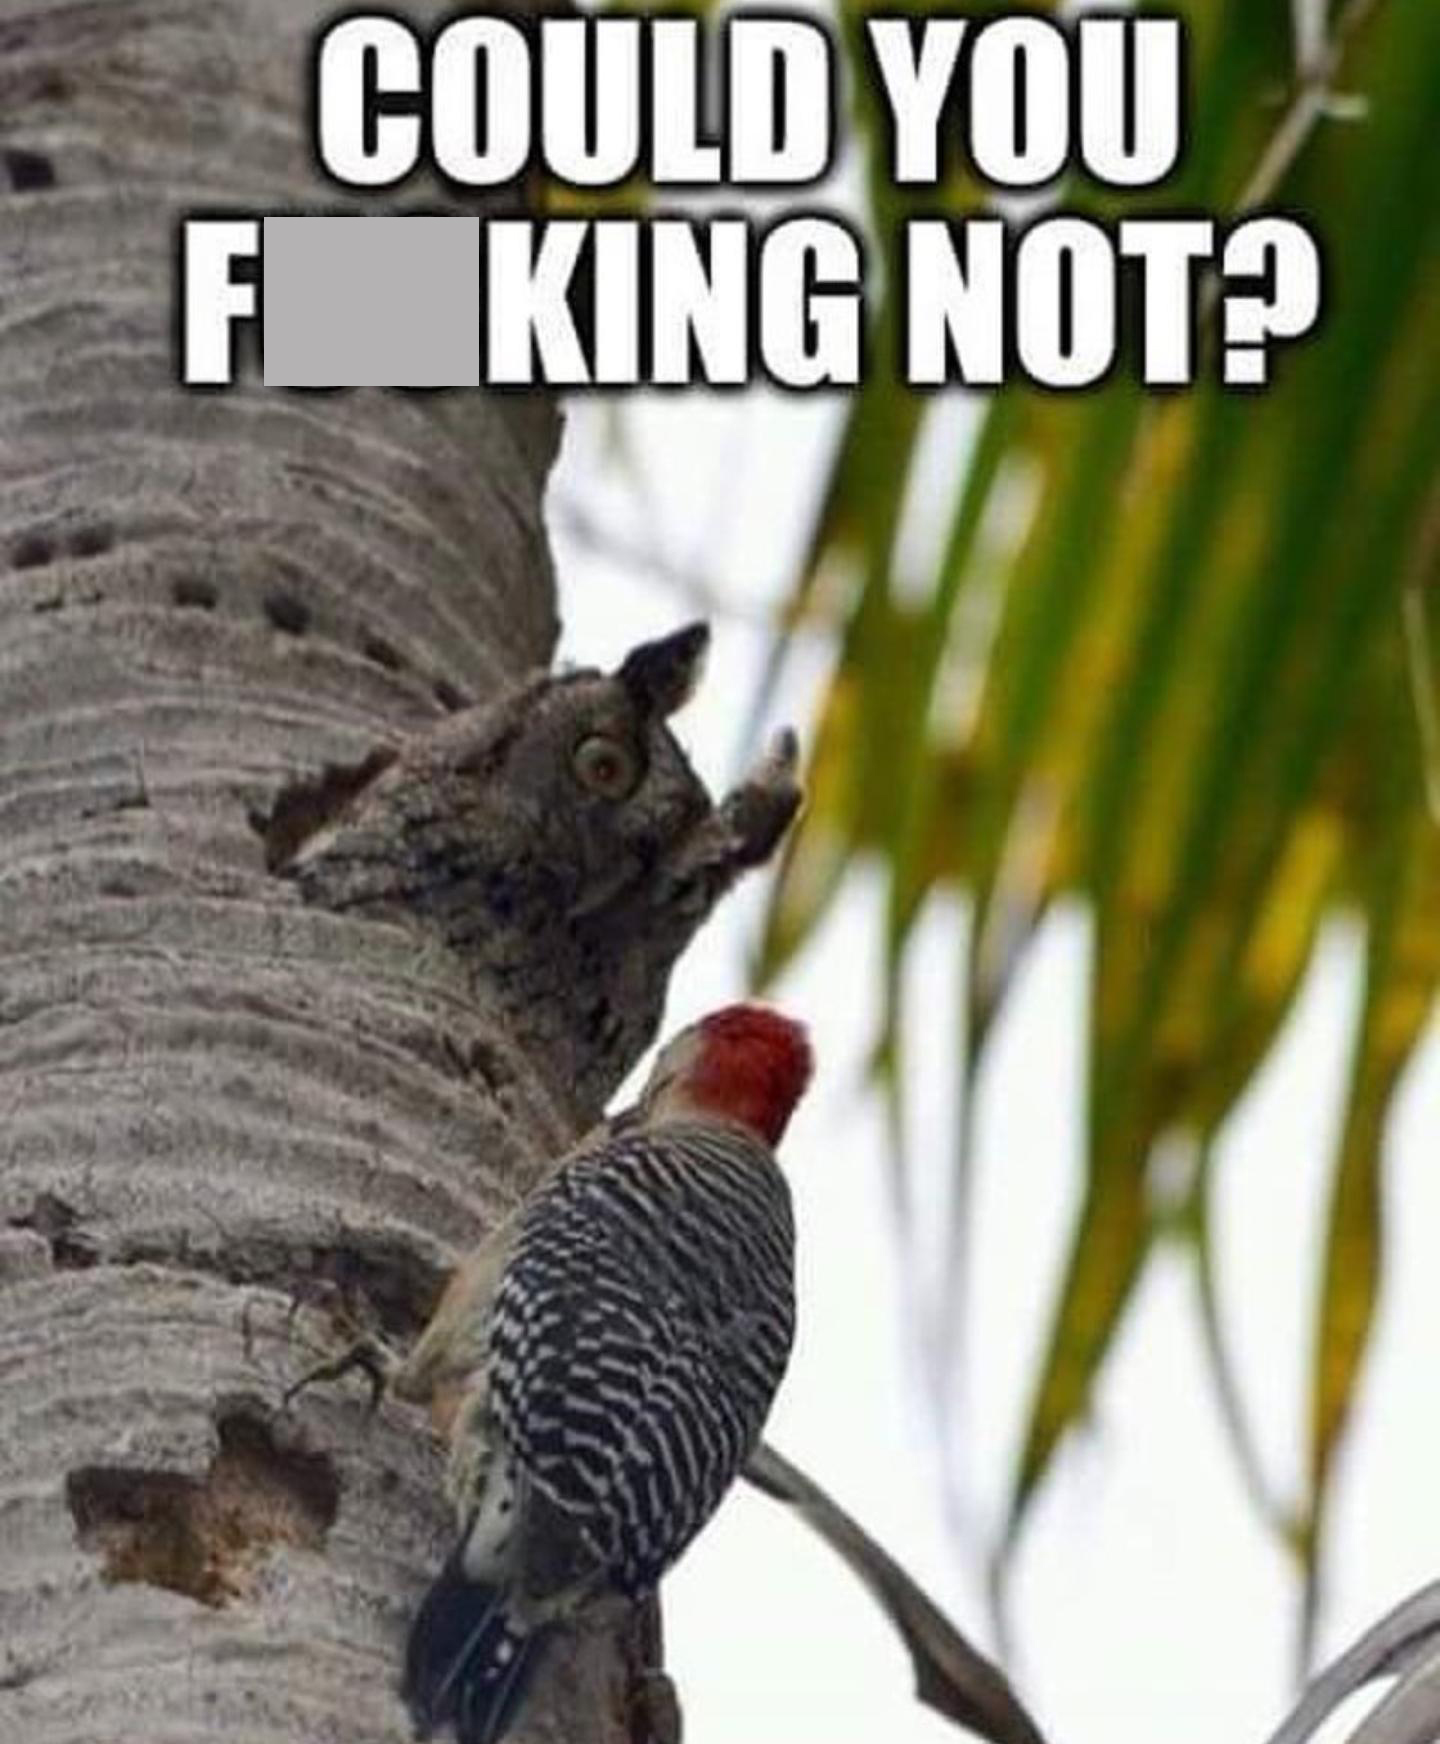 funny memes and pics - fauna - Could You F King Not?